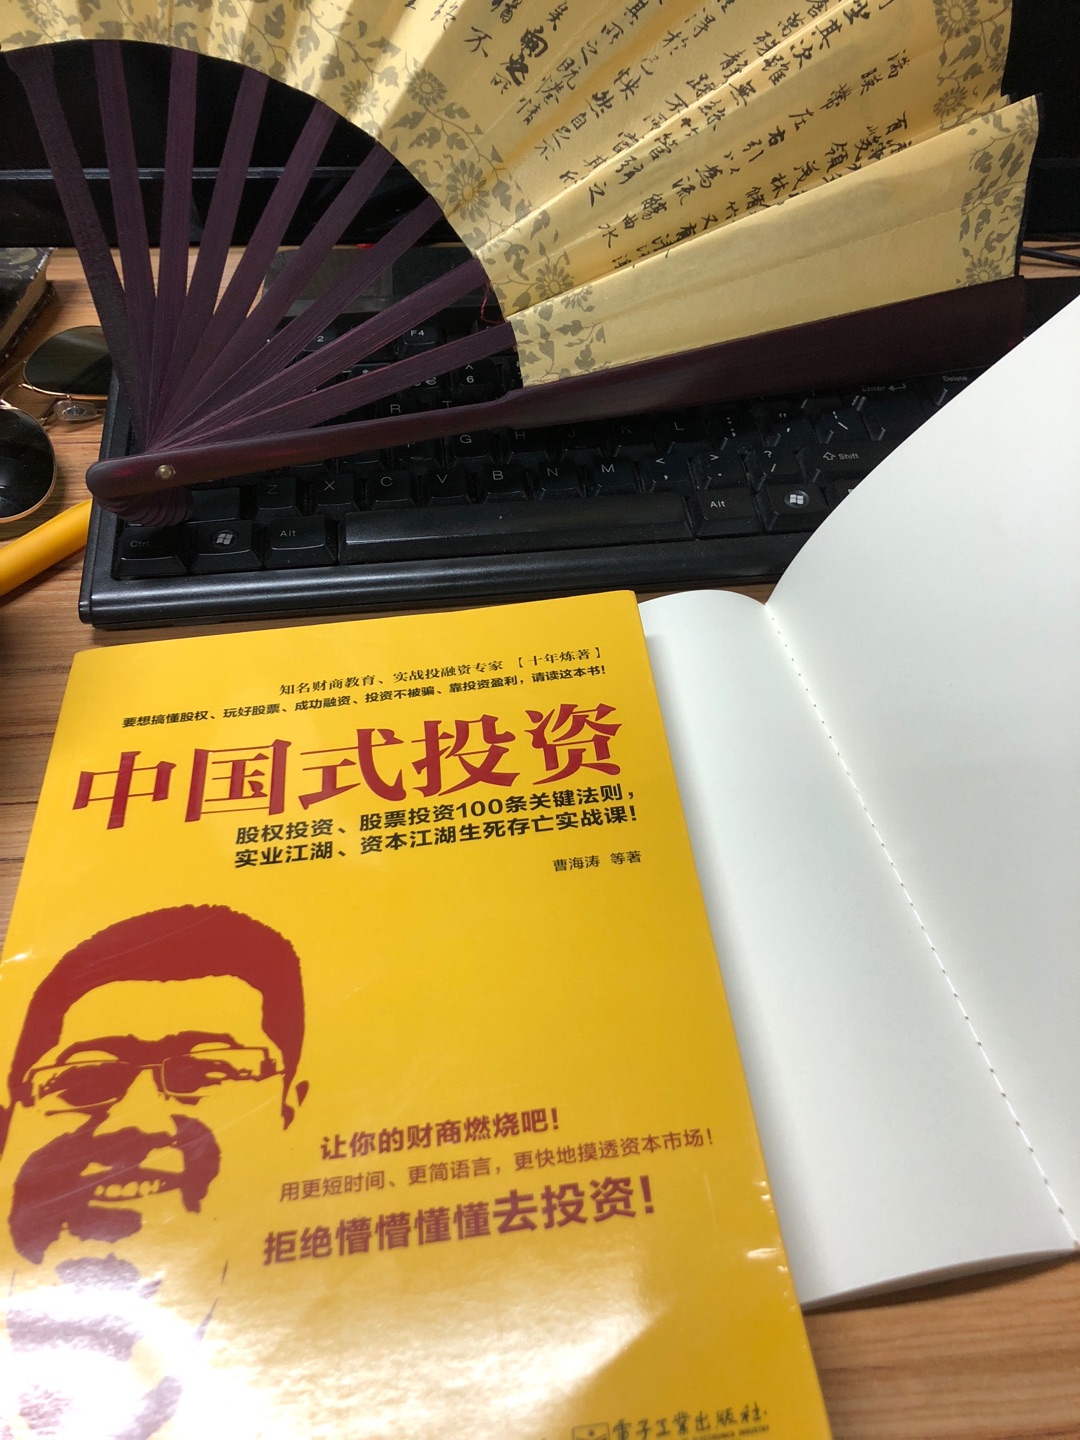 However it is impossible to get into the market right away if we don\'t understand how China works or how Chinese thinks. In order to have great relationship with China or lets say great Guan Xi with Chinese, I think Mr Cao\'s book is a must read book for all international traders, students, as well as foreign governmetns. Here I want to express my great appreciation and many thanks to Mr Cao for wrting this book, I benefited a lot from this book. Thank you!